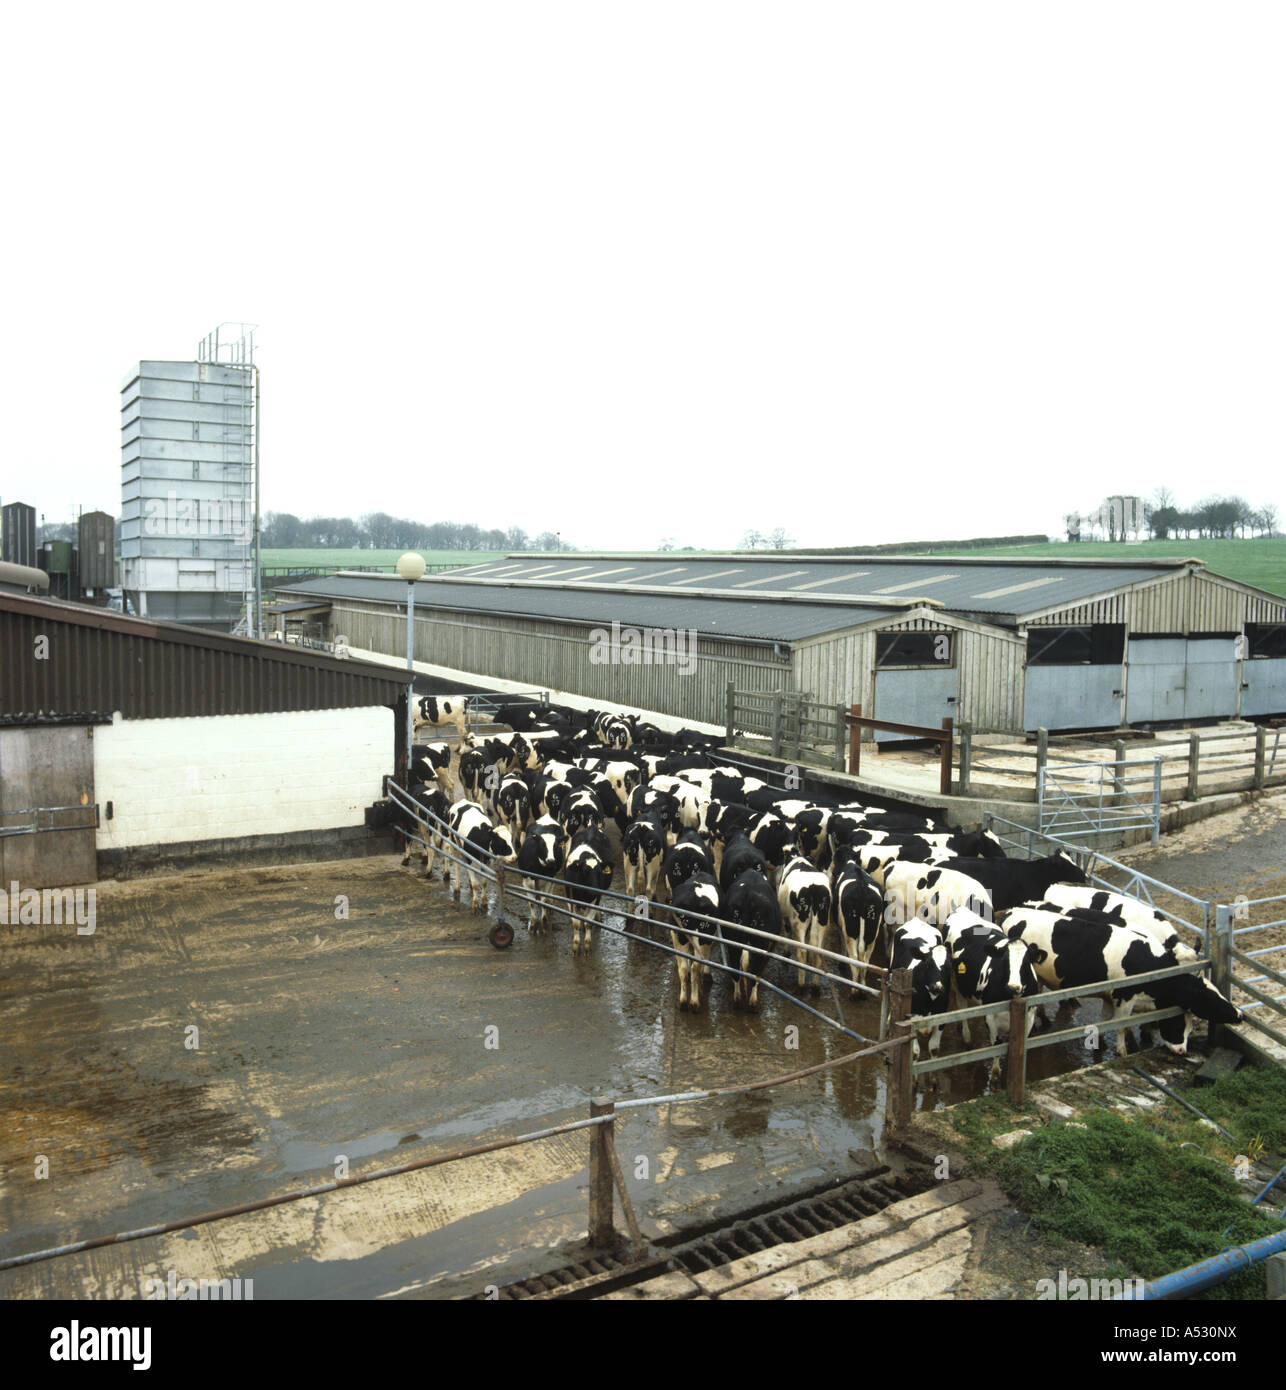 Looking down into a farm cattle collecting yard with Holstein Friesian heifers Stock Photo